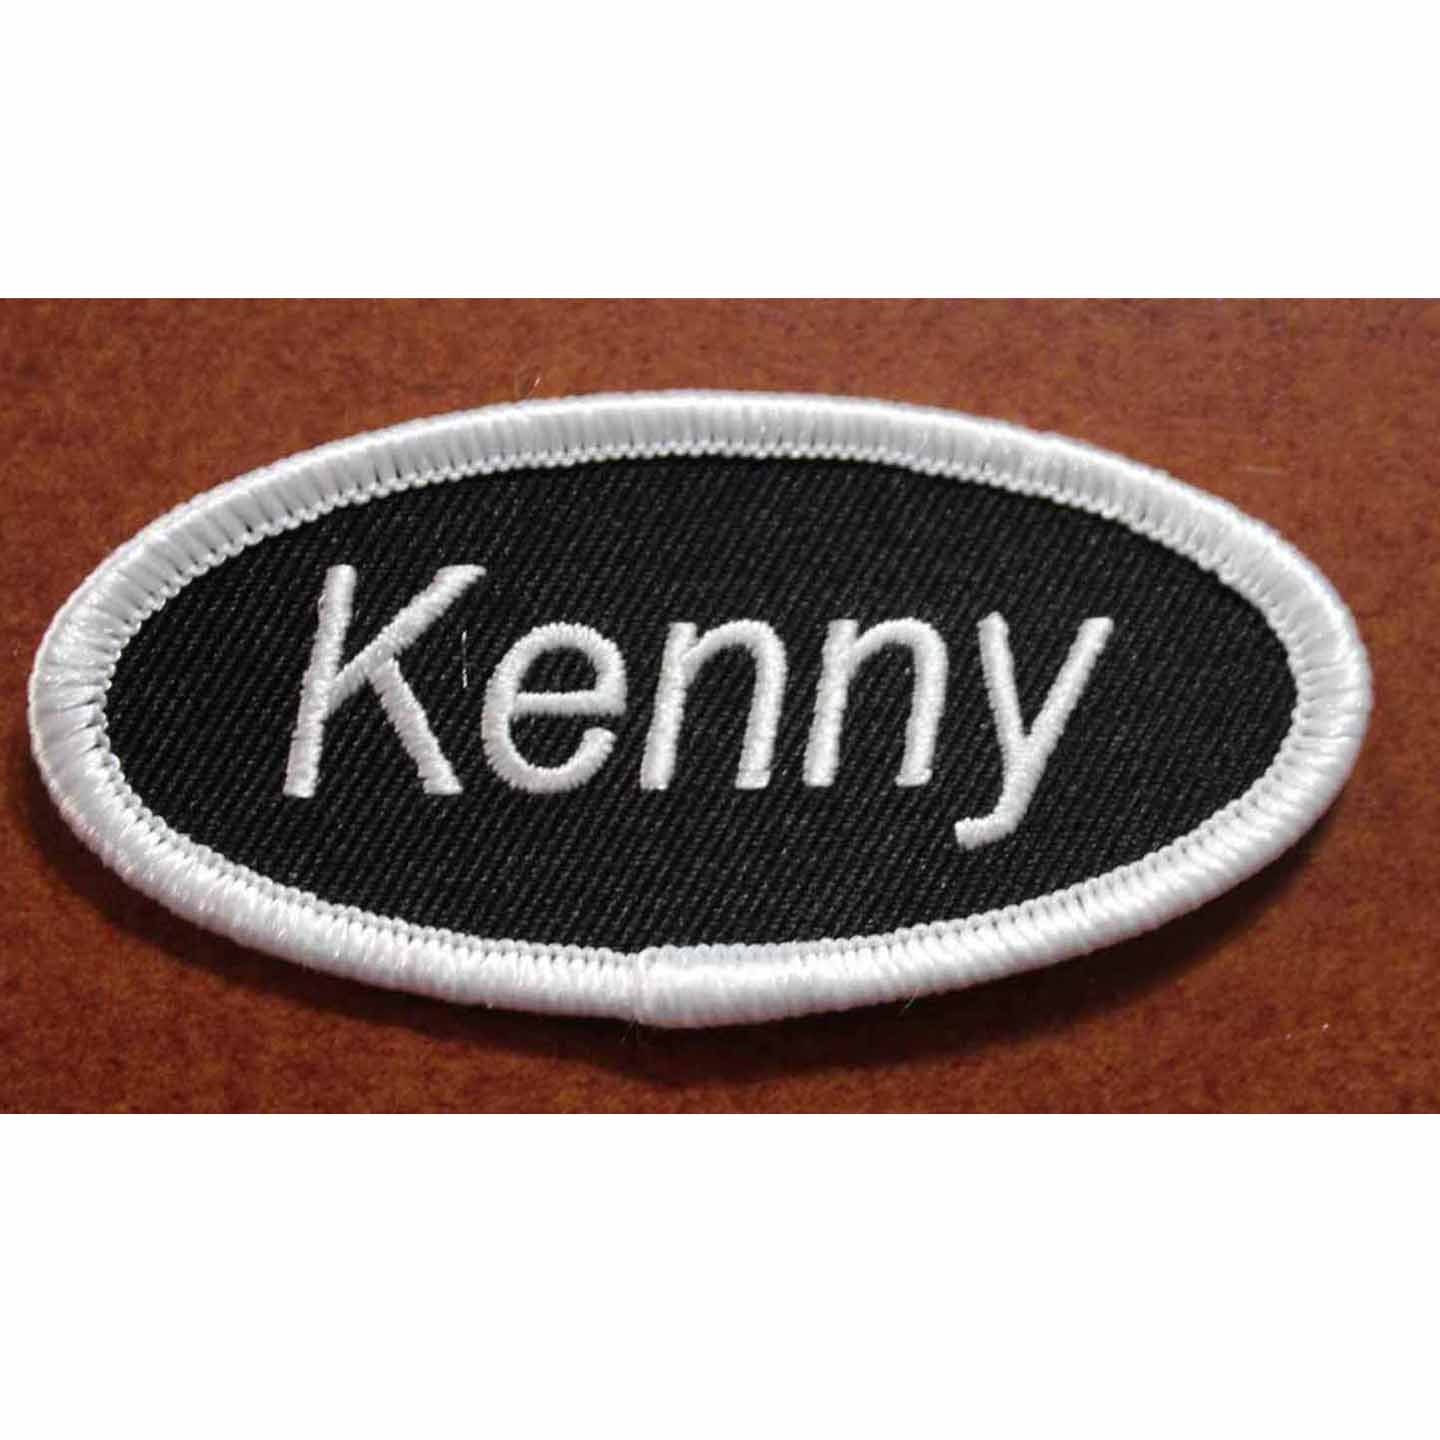 Set of 2 Barbie and Ken Name Tags 3 x 1.5 Embroidered Iron On Uniform  Applique Patch